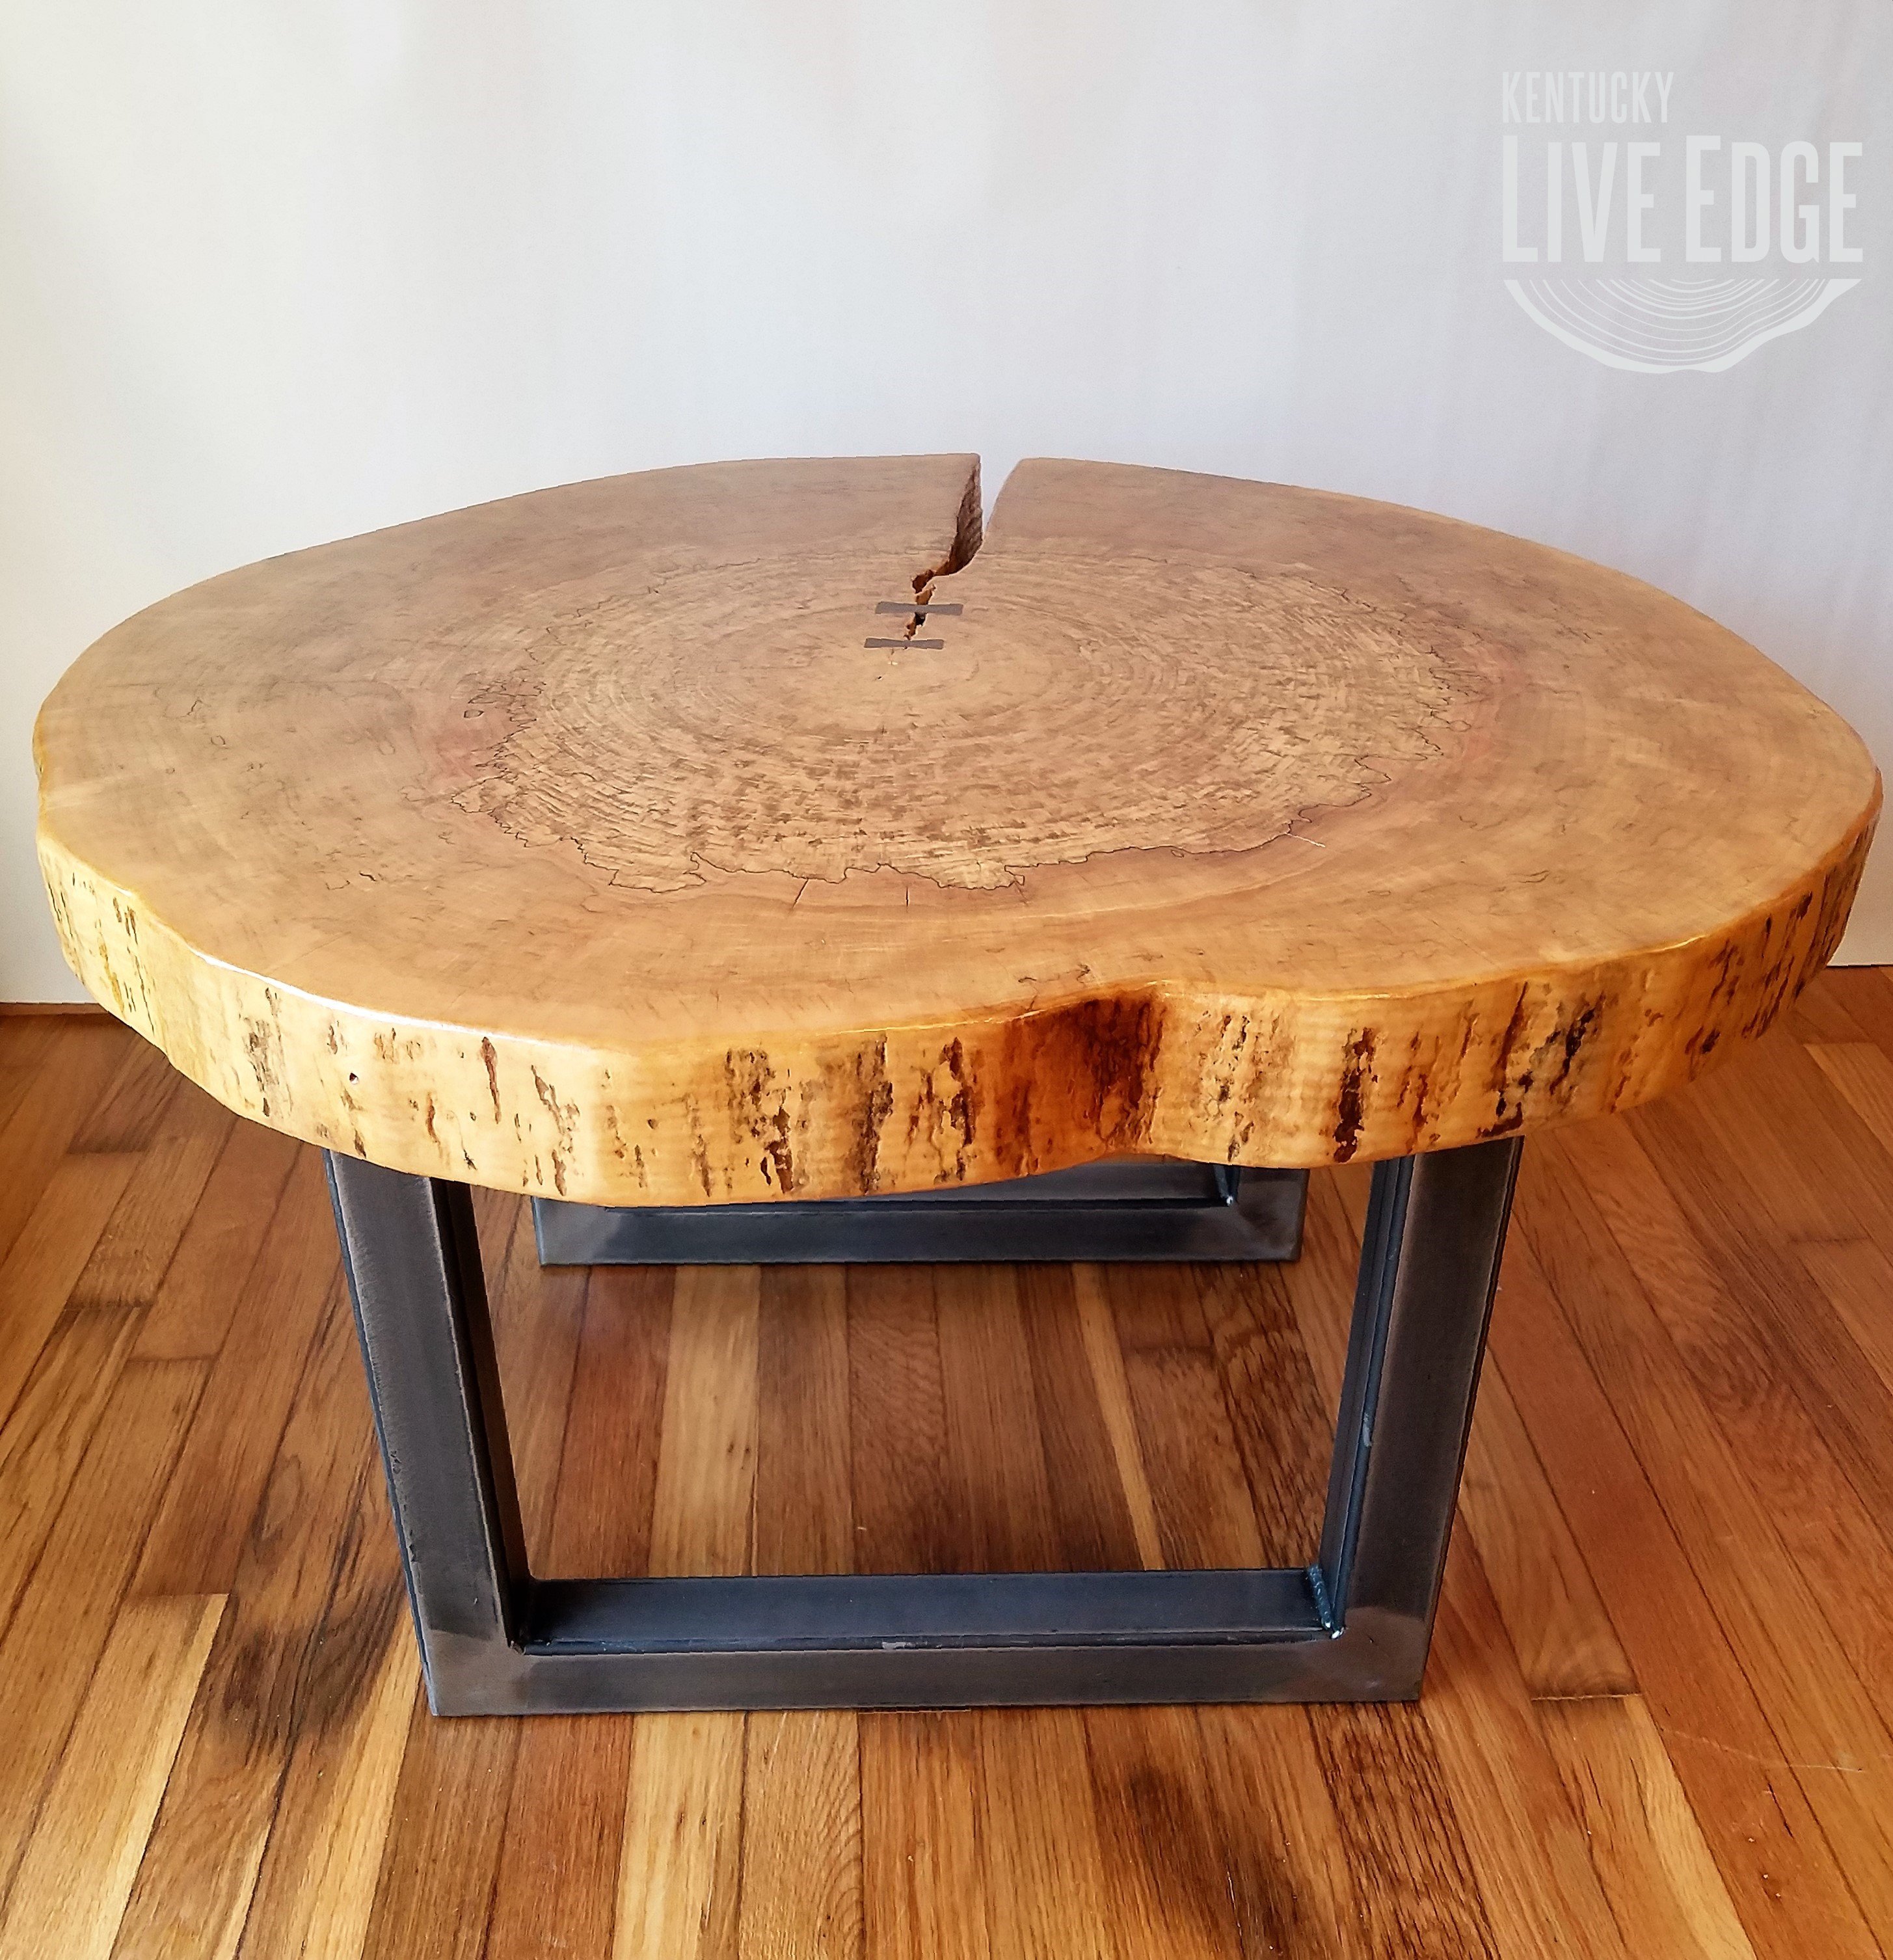 the perfect free wood log end table mira road round coffee live edge industrial tree slice rustic furniture living room side natural maple slab stackable plastic tables wall